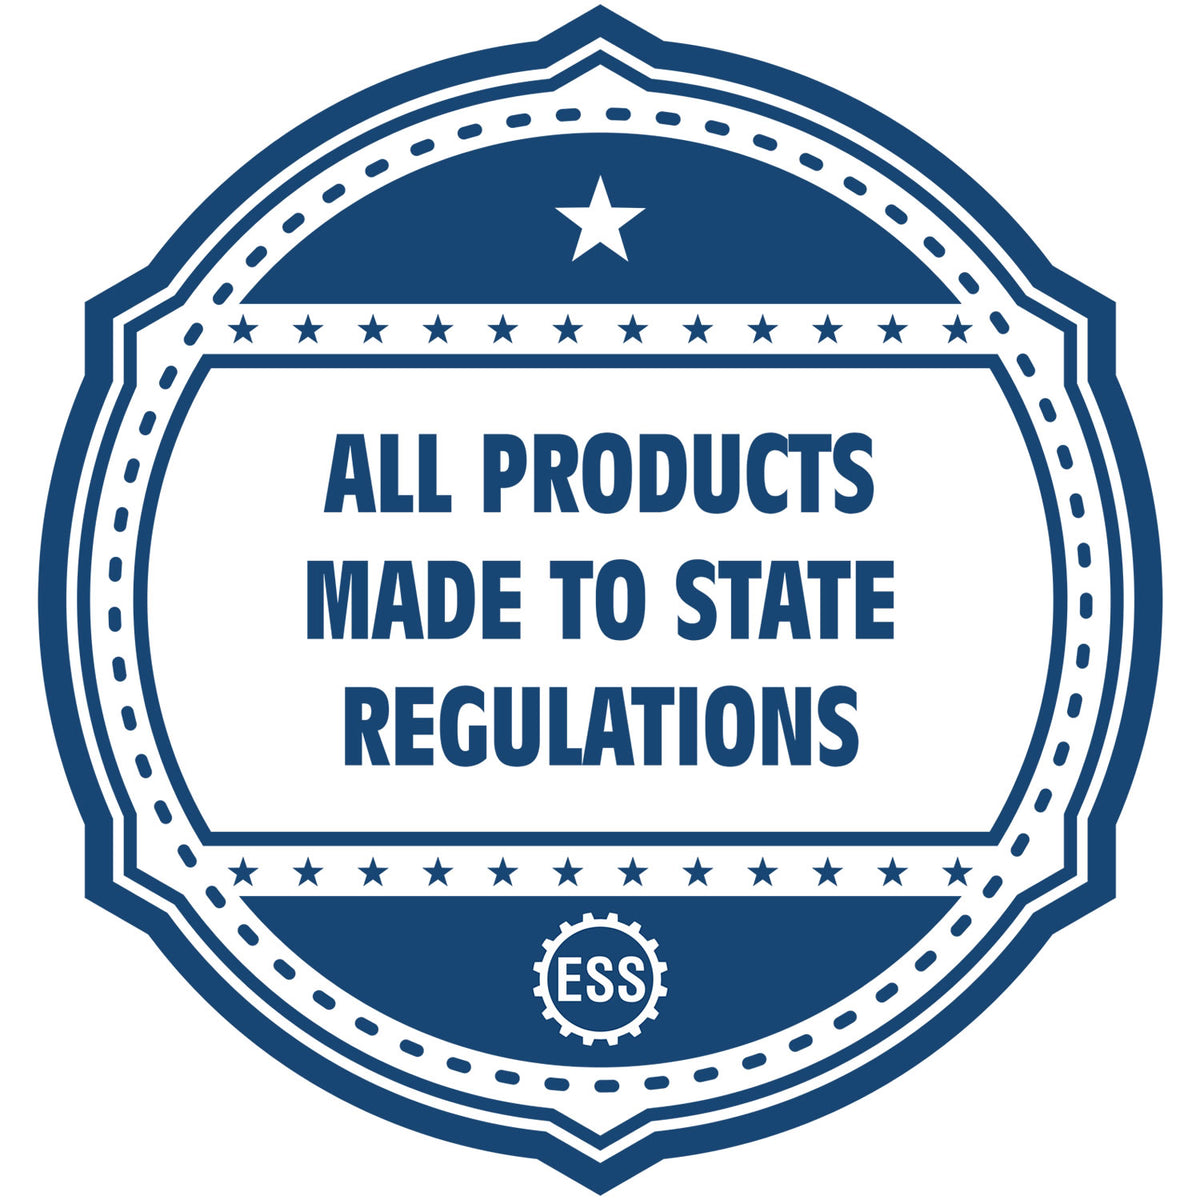 An icon or badge element for the State of Rhode Island Long Reach Architectural Embossing Seal showing that this product is made in compliance with state regulations.